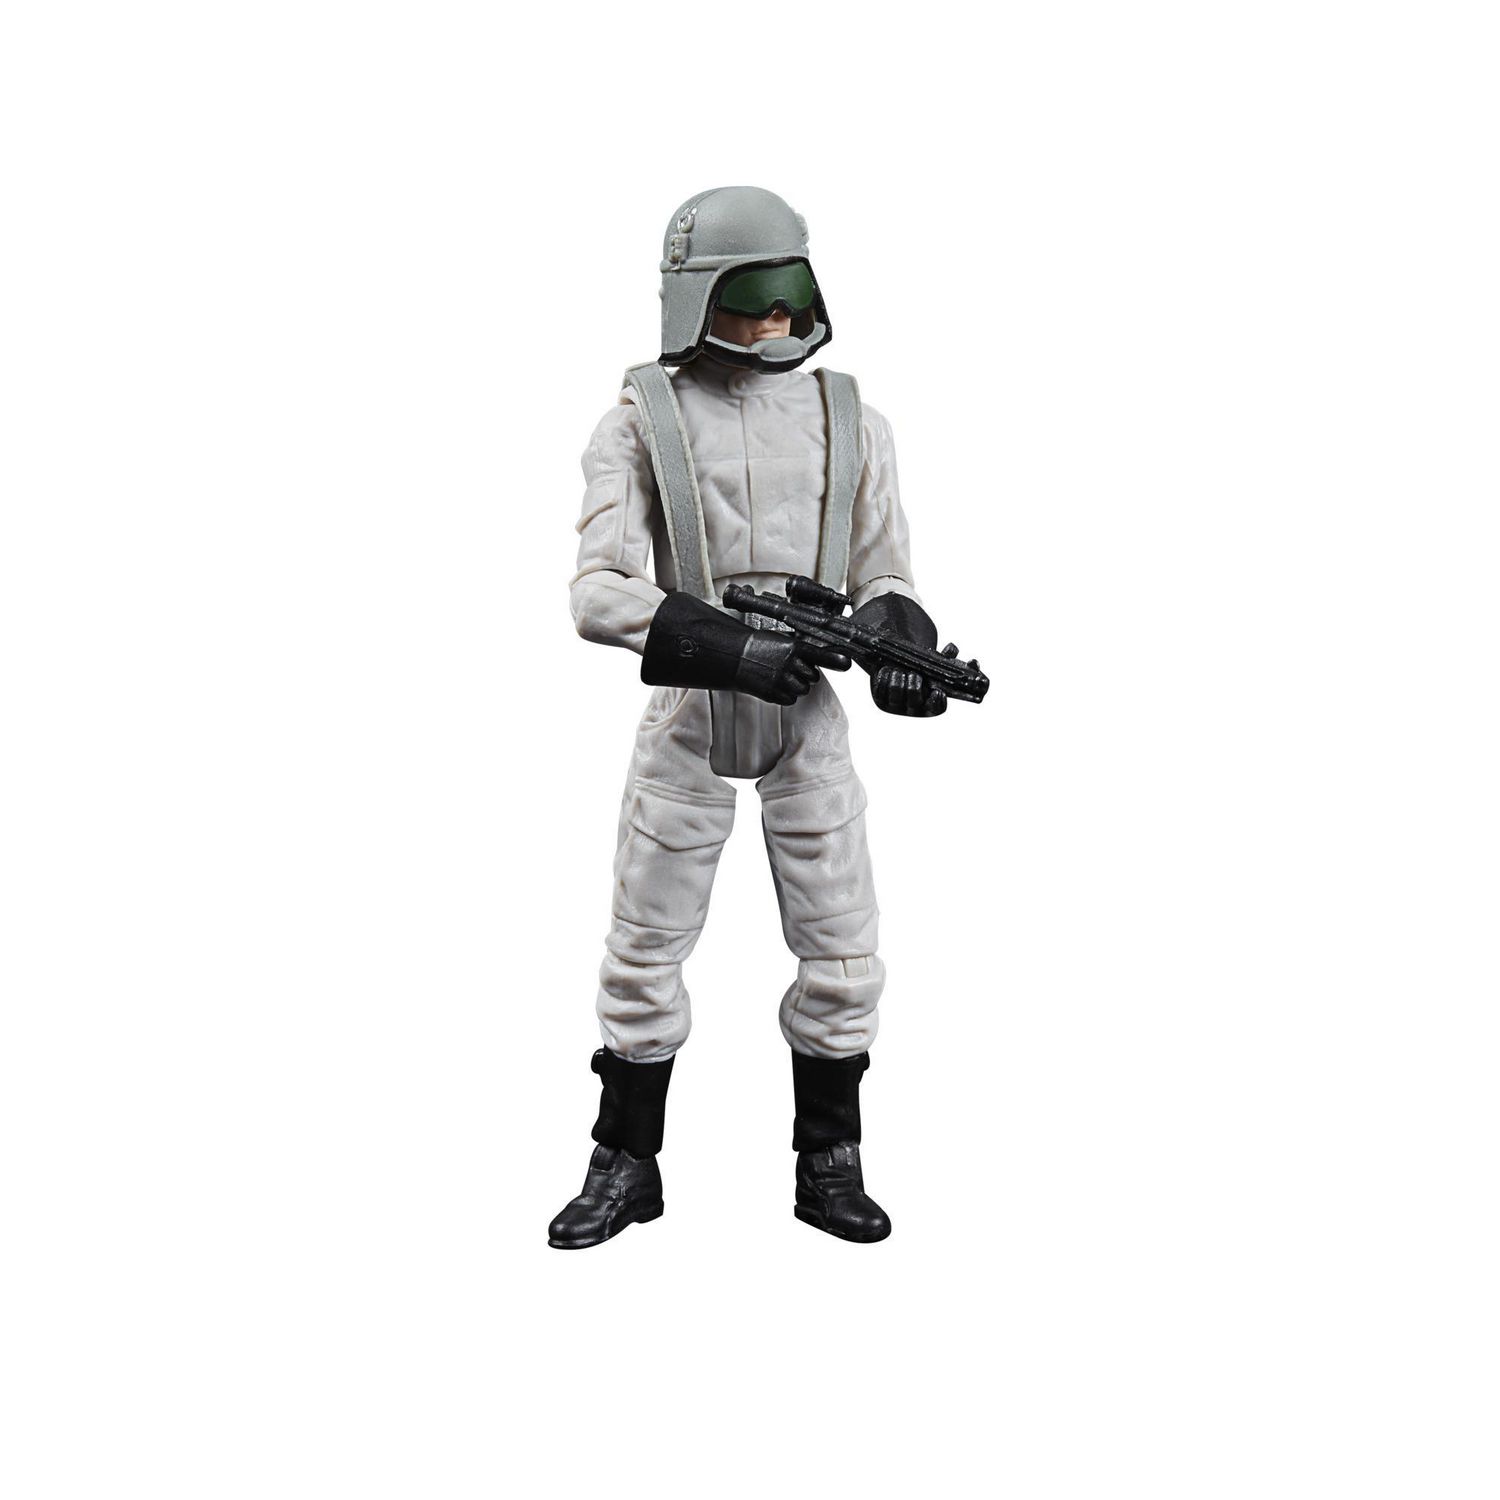 Star Wars The Vintage Collection AT-ST Driver Toy, 3.75-Inch-Scale 